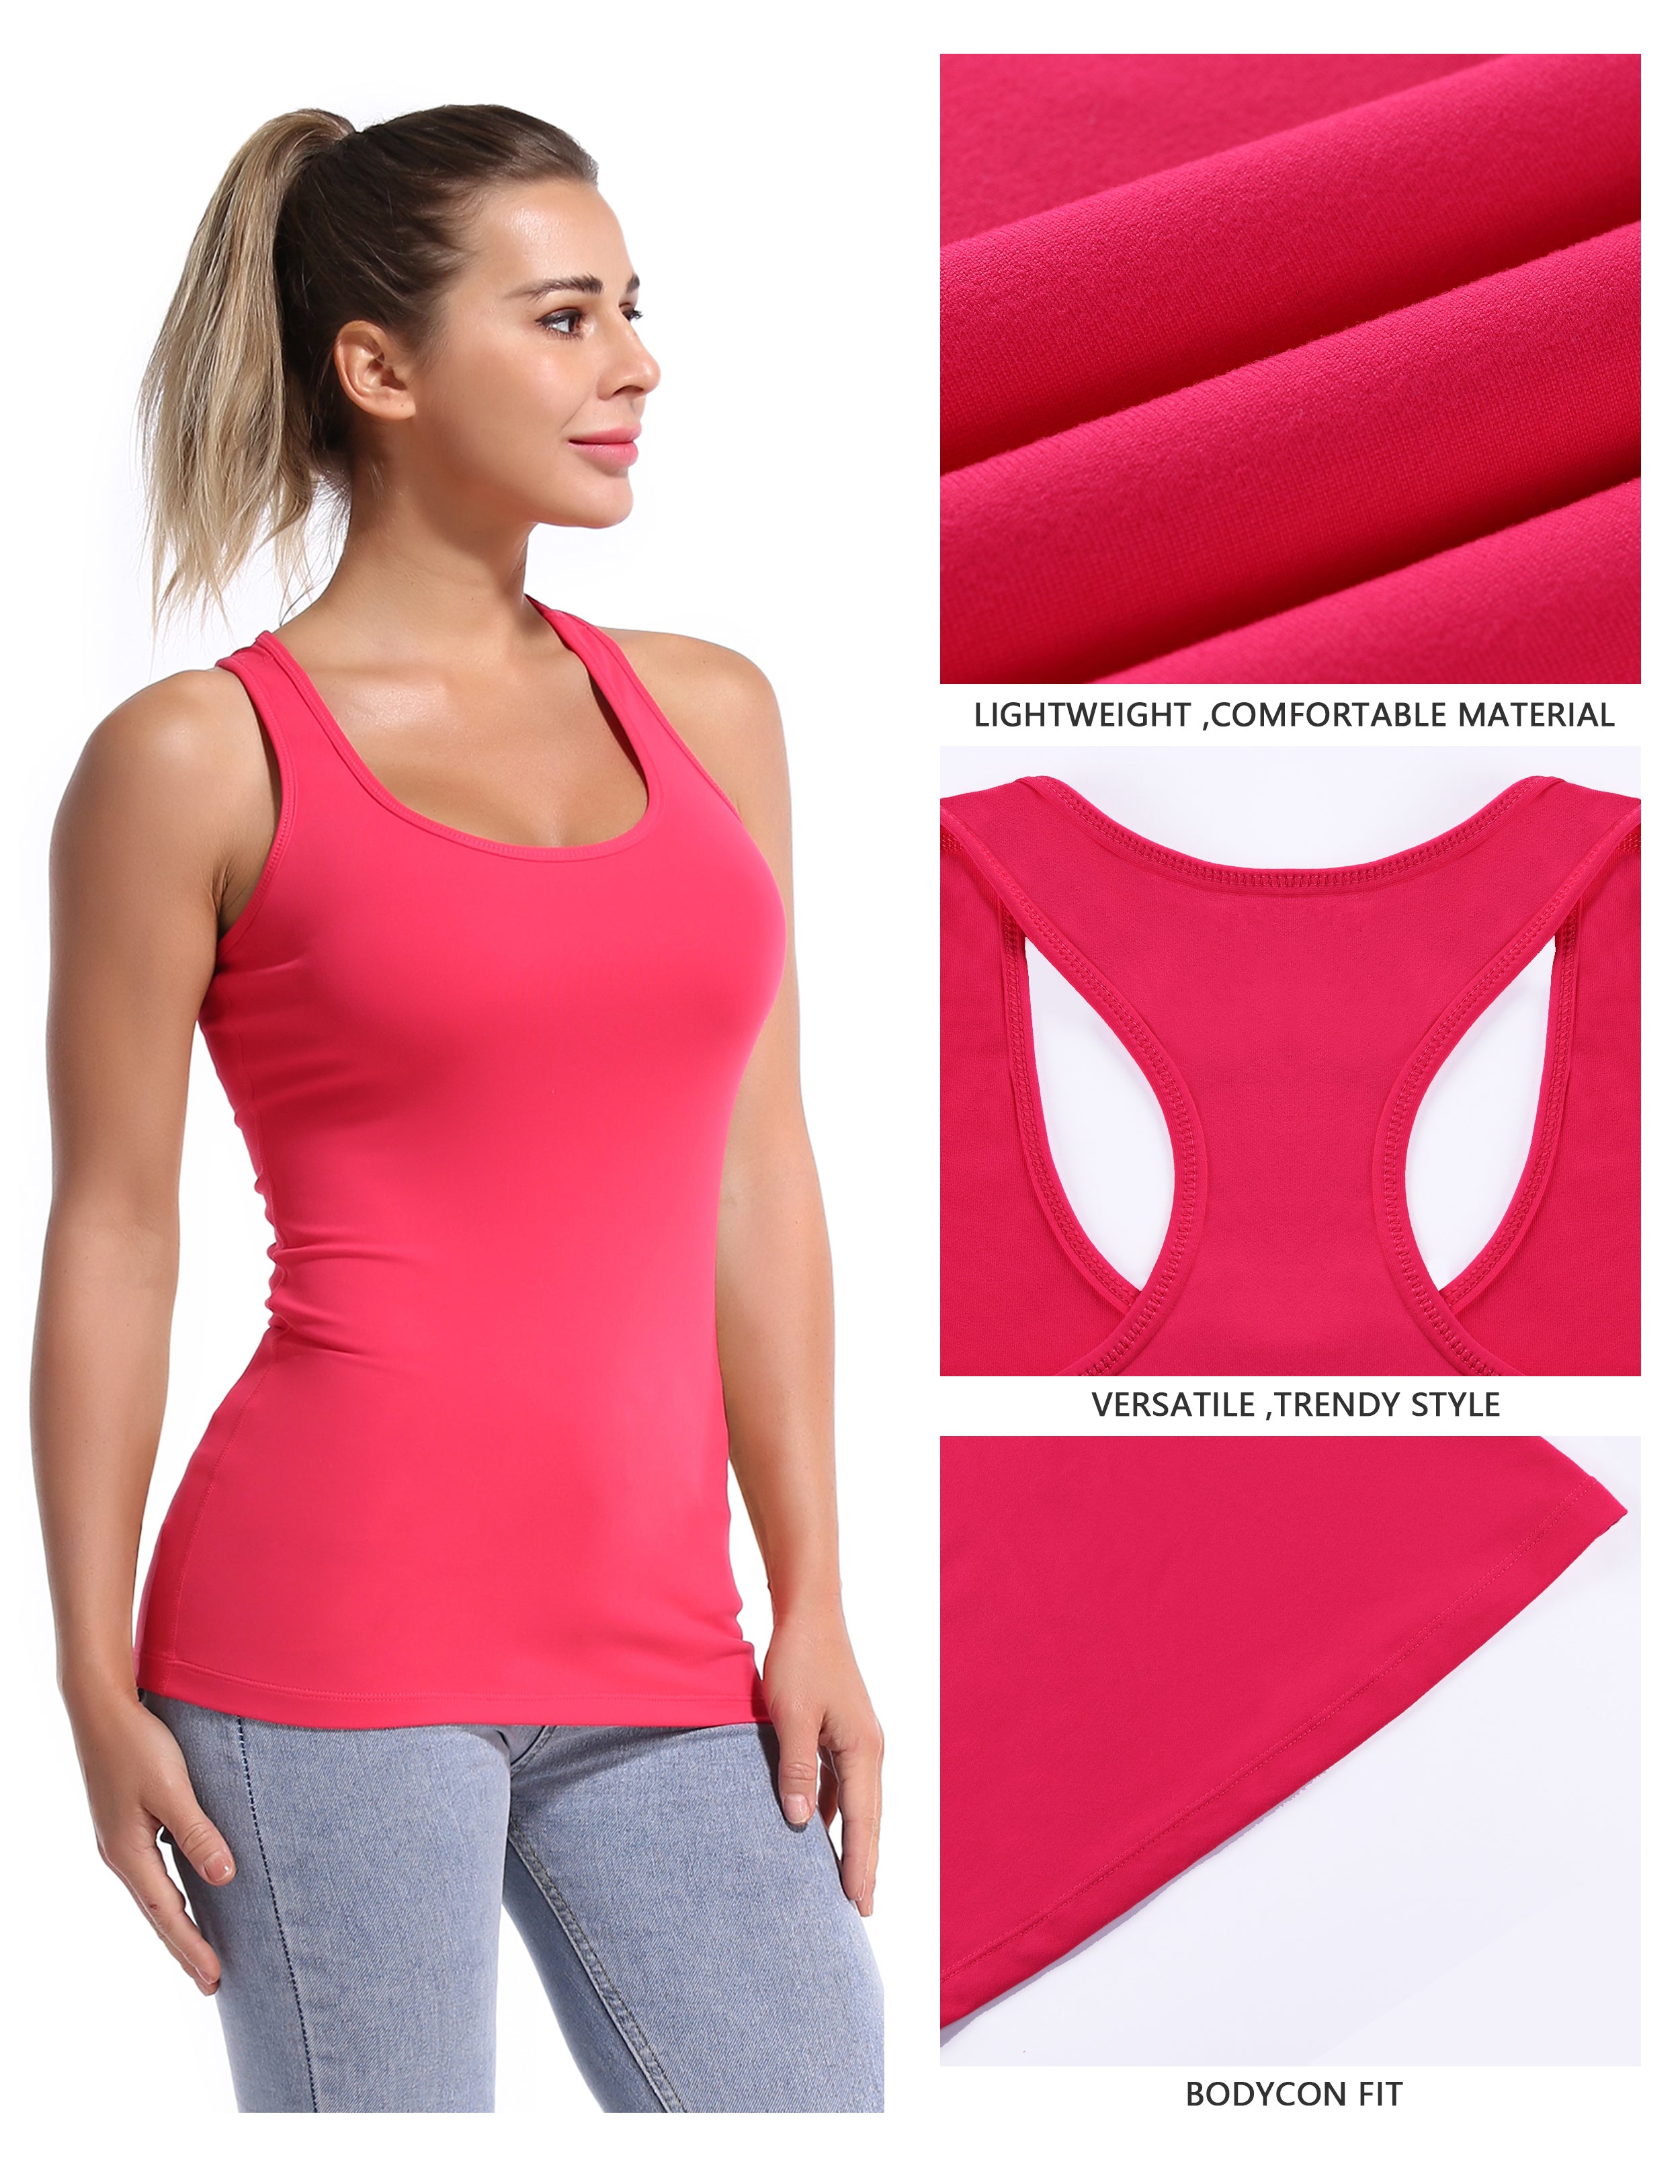 Racerback Athletic Tank Tops red 92%Nylon/8%Spandex(Cotton Soft) Designed for Gym Tight Fit So buttery soft, it feels weightless Sweat-wicking Four-way stretch Breathable Contours your body Sits below the waistband for moderate, everyday coverage